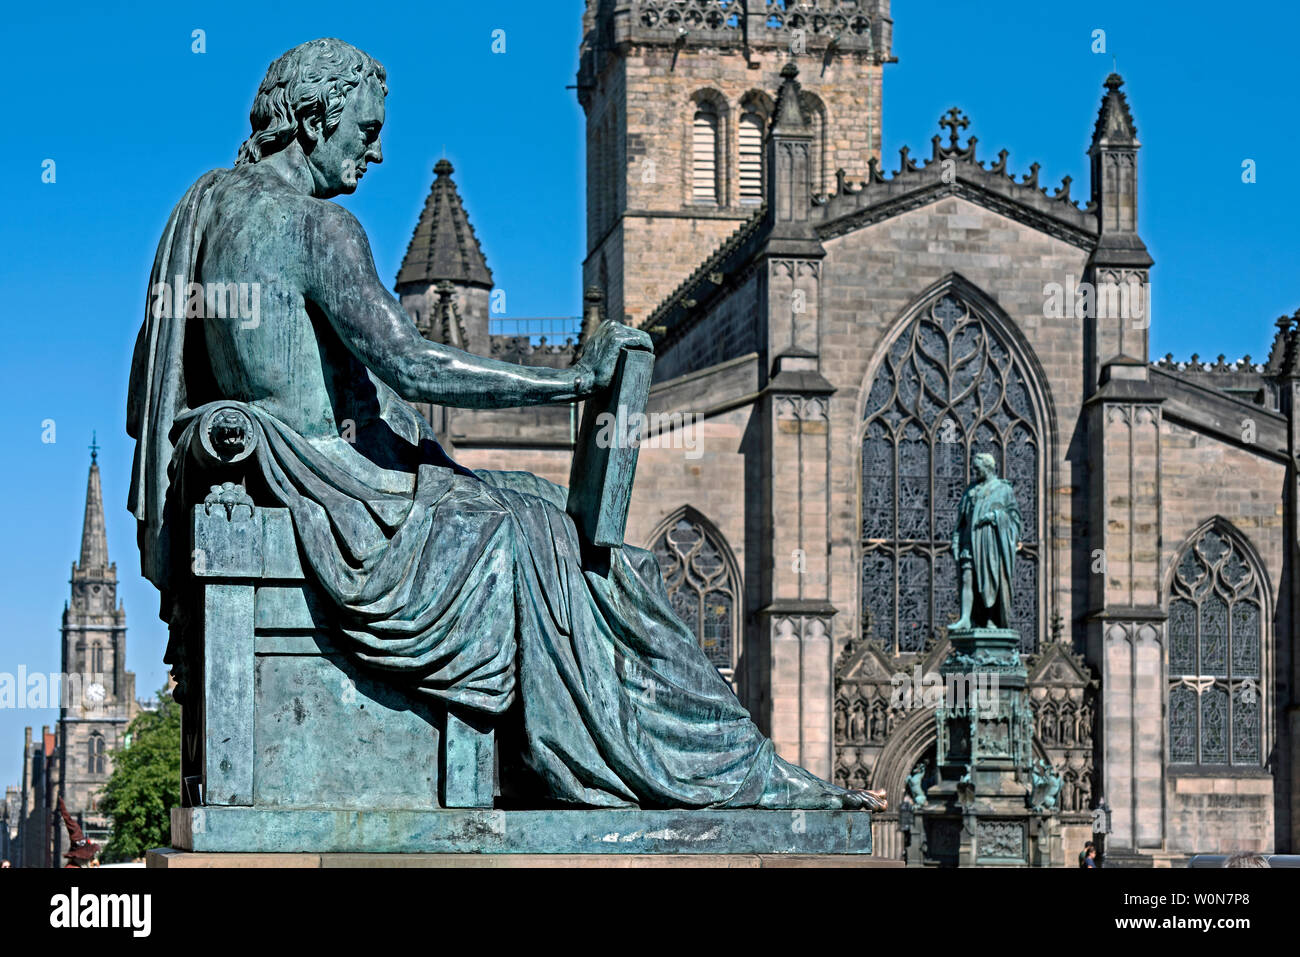 The statue of David Hume by sculptor Alexander Stoddart  on the Royal Mile in Edinburgh with St Giles Cathedral in the background. Stock Photo